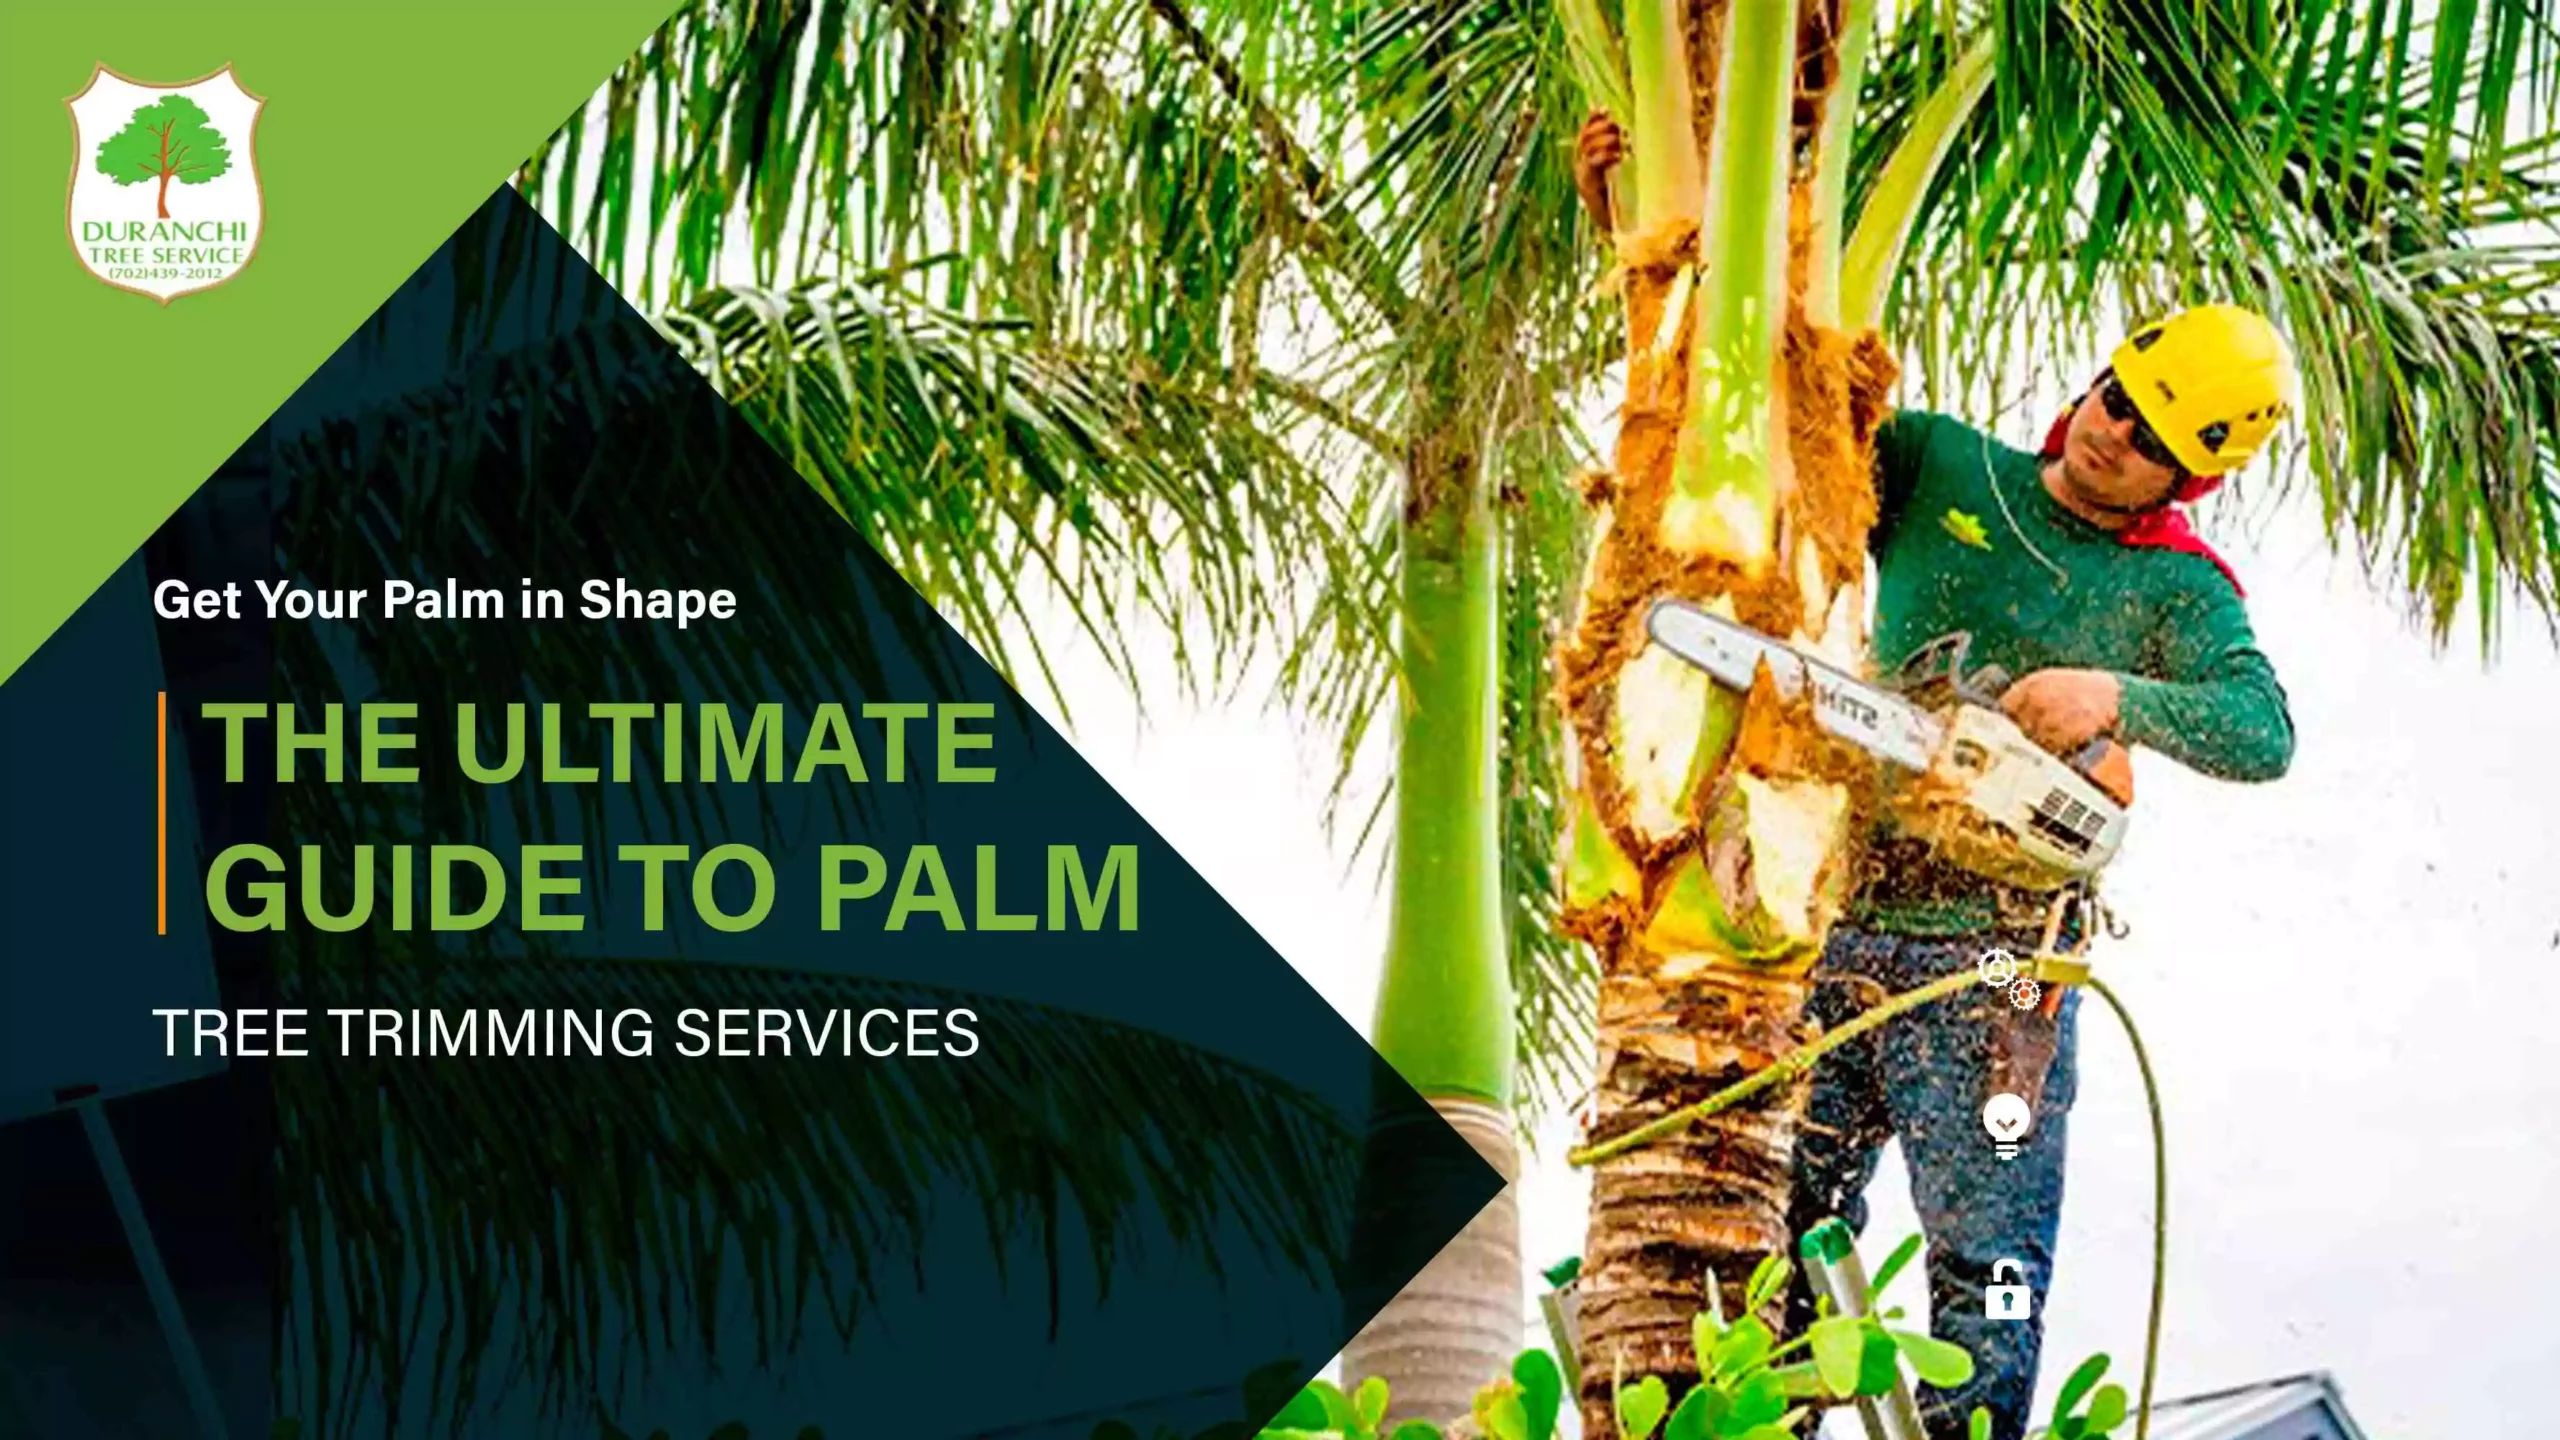 Get Your Palm in Shape: The Ultimate Guide to Palm Tree Trimming Services